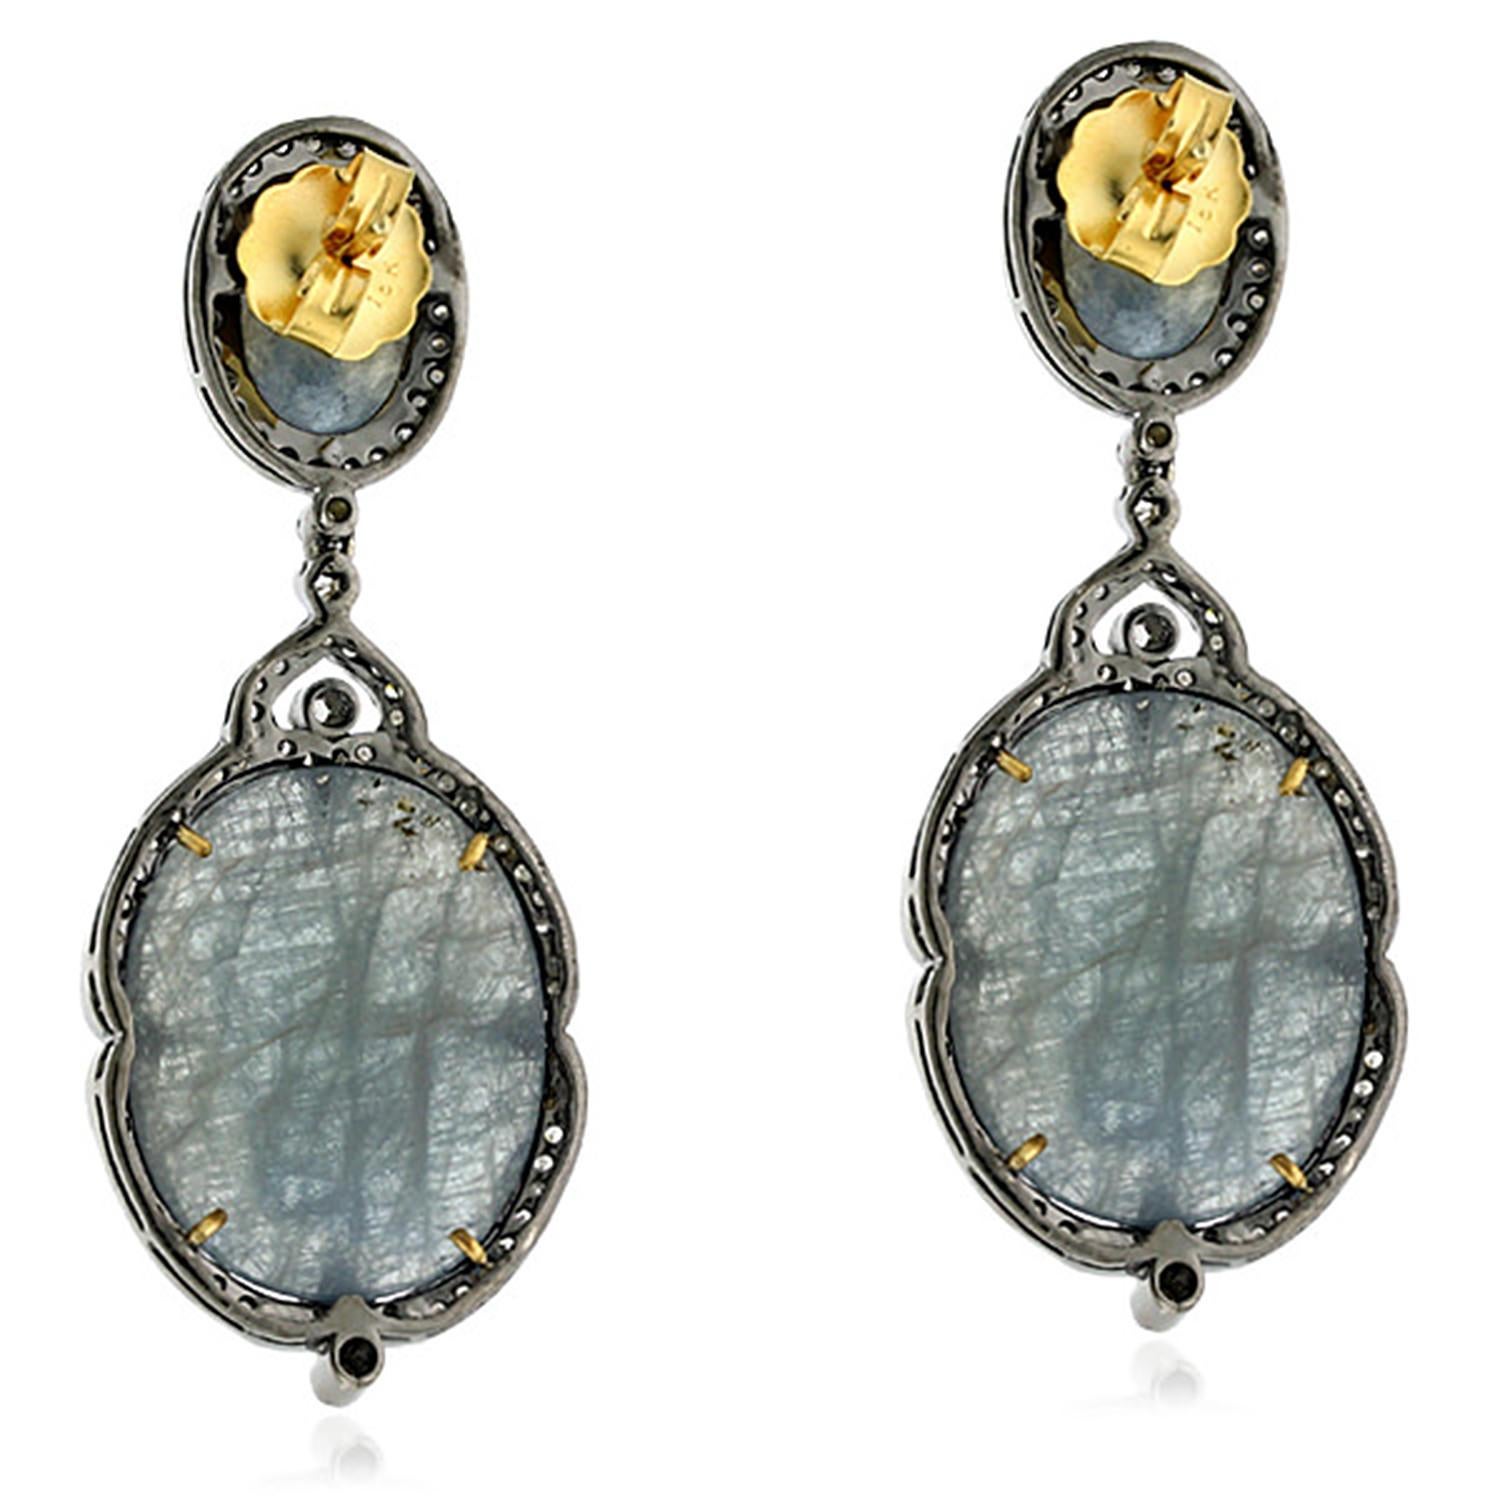 Pretty and unique looking this blue grey slice sapphire drop earring in silver with gold push and post is ornated with pave diamonds around making it wearable with denims for semi formal look.

Closure: Push